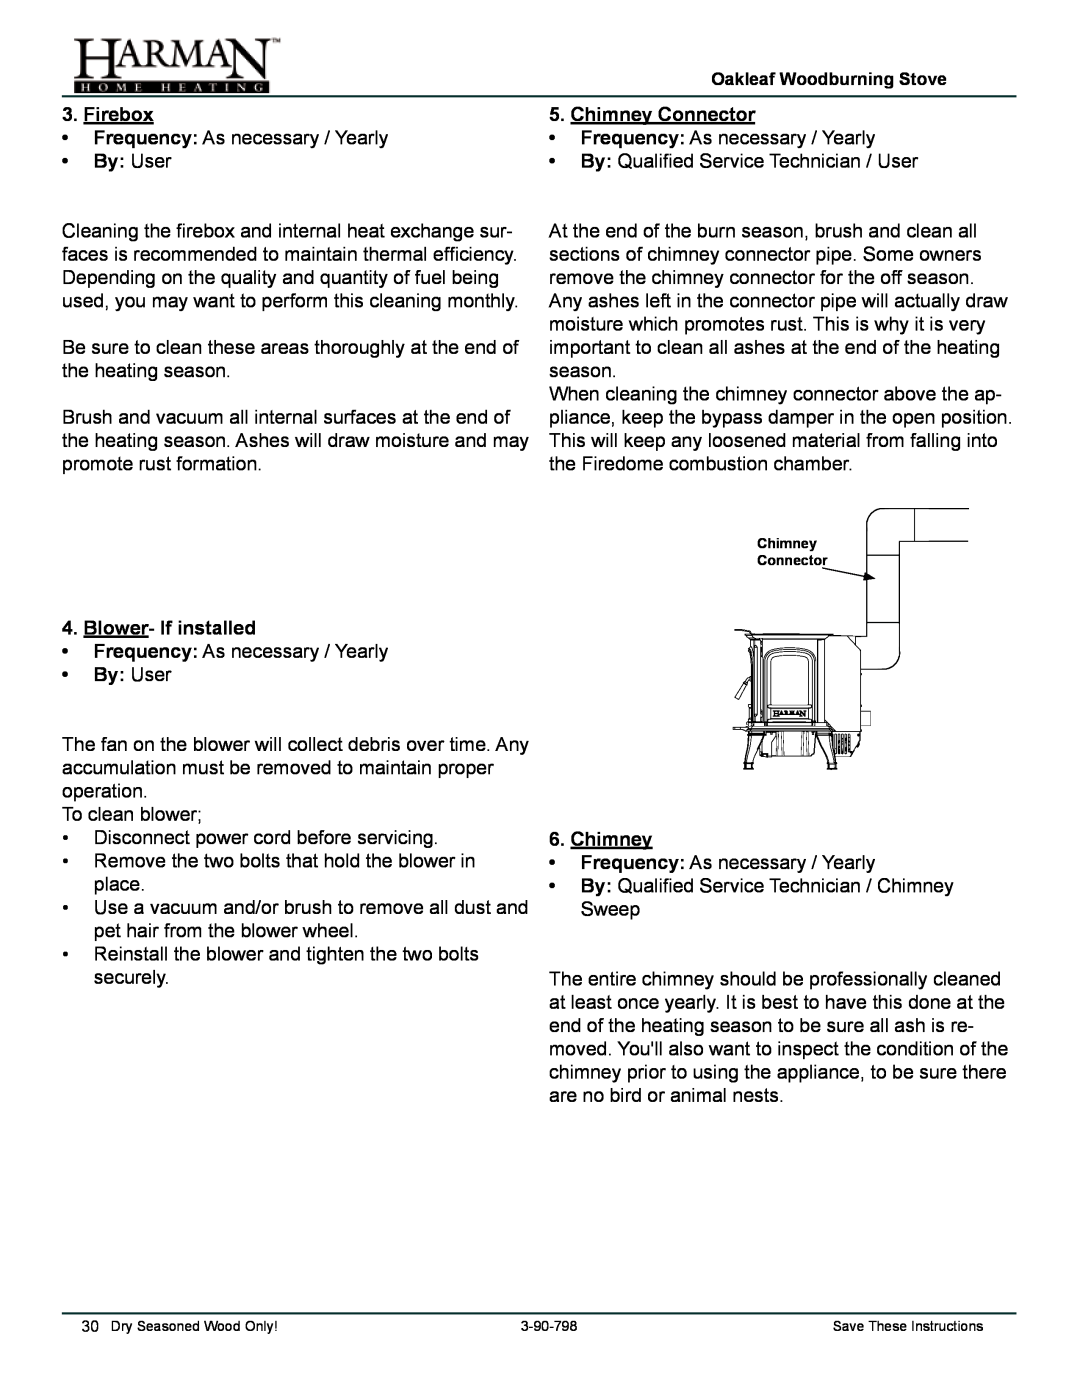 Harman Stove Company 1-90-797000 manual Firebox, By User, Chimney Connector, Blower- If installed 